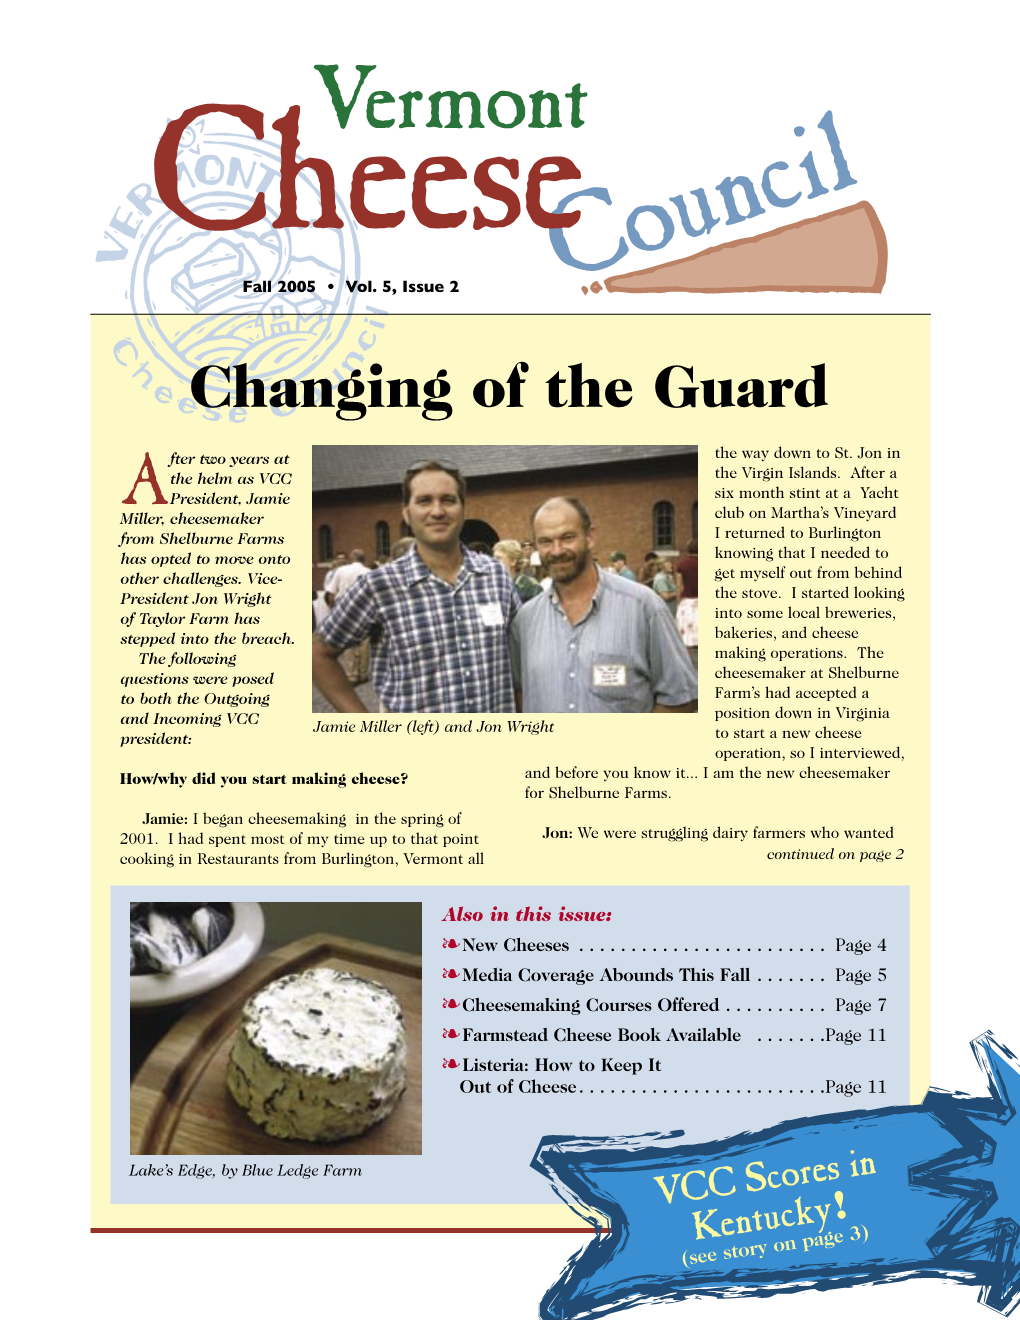 10-05 Cheese Council News.Indd